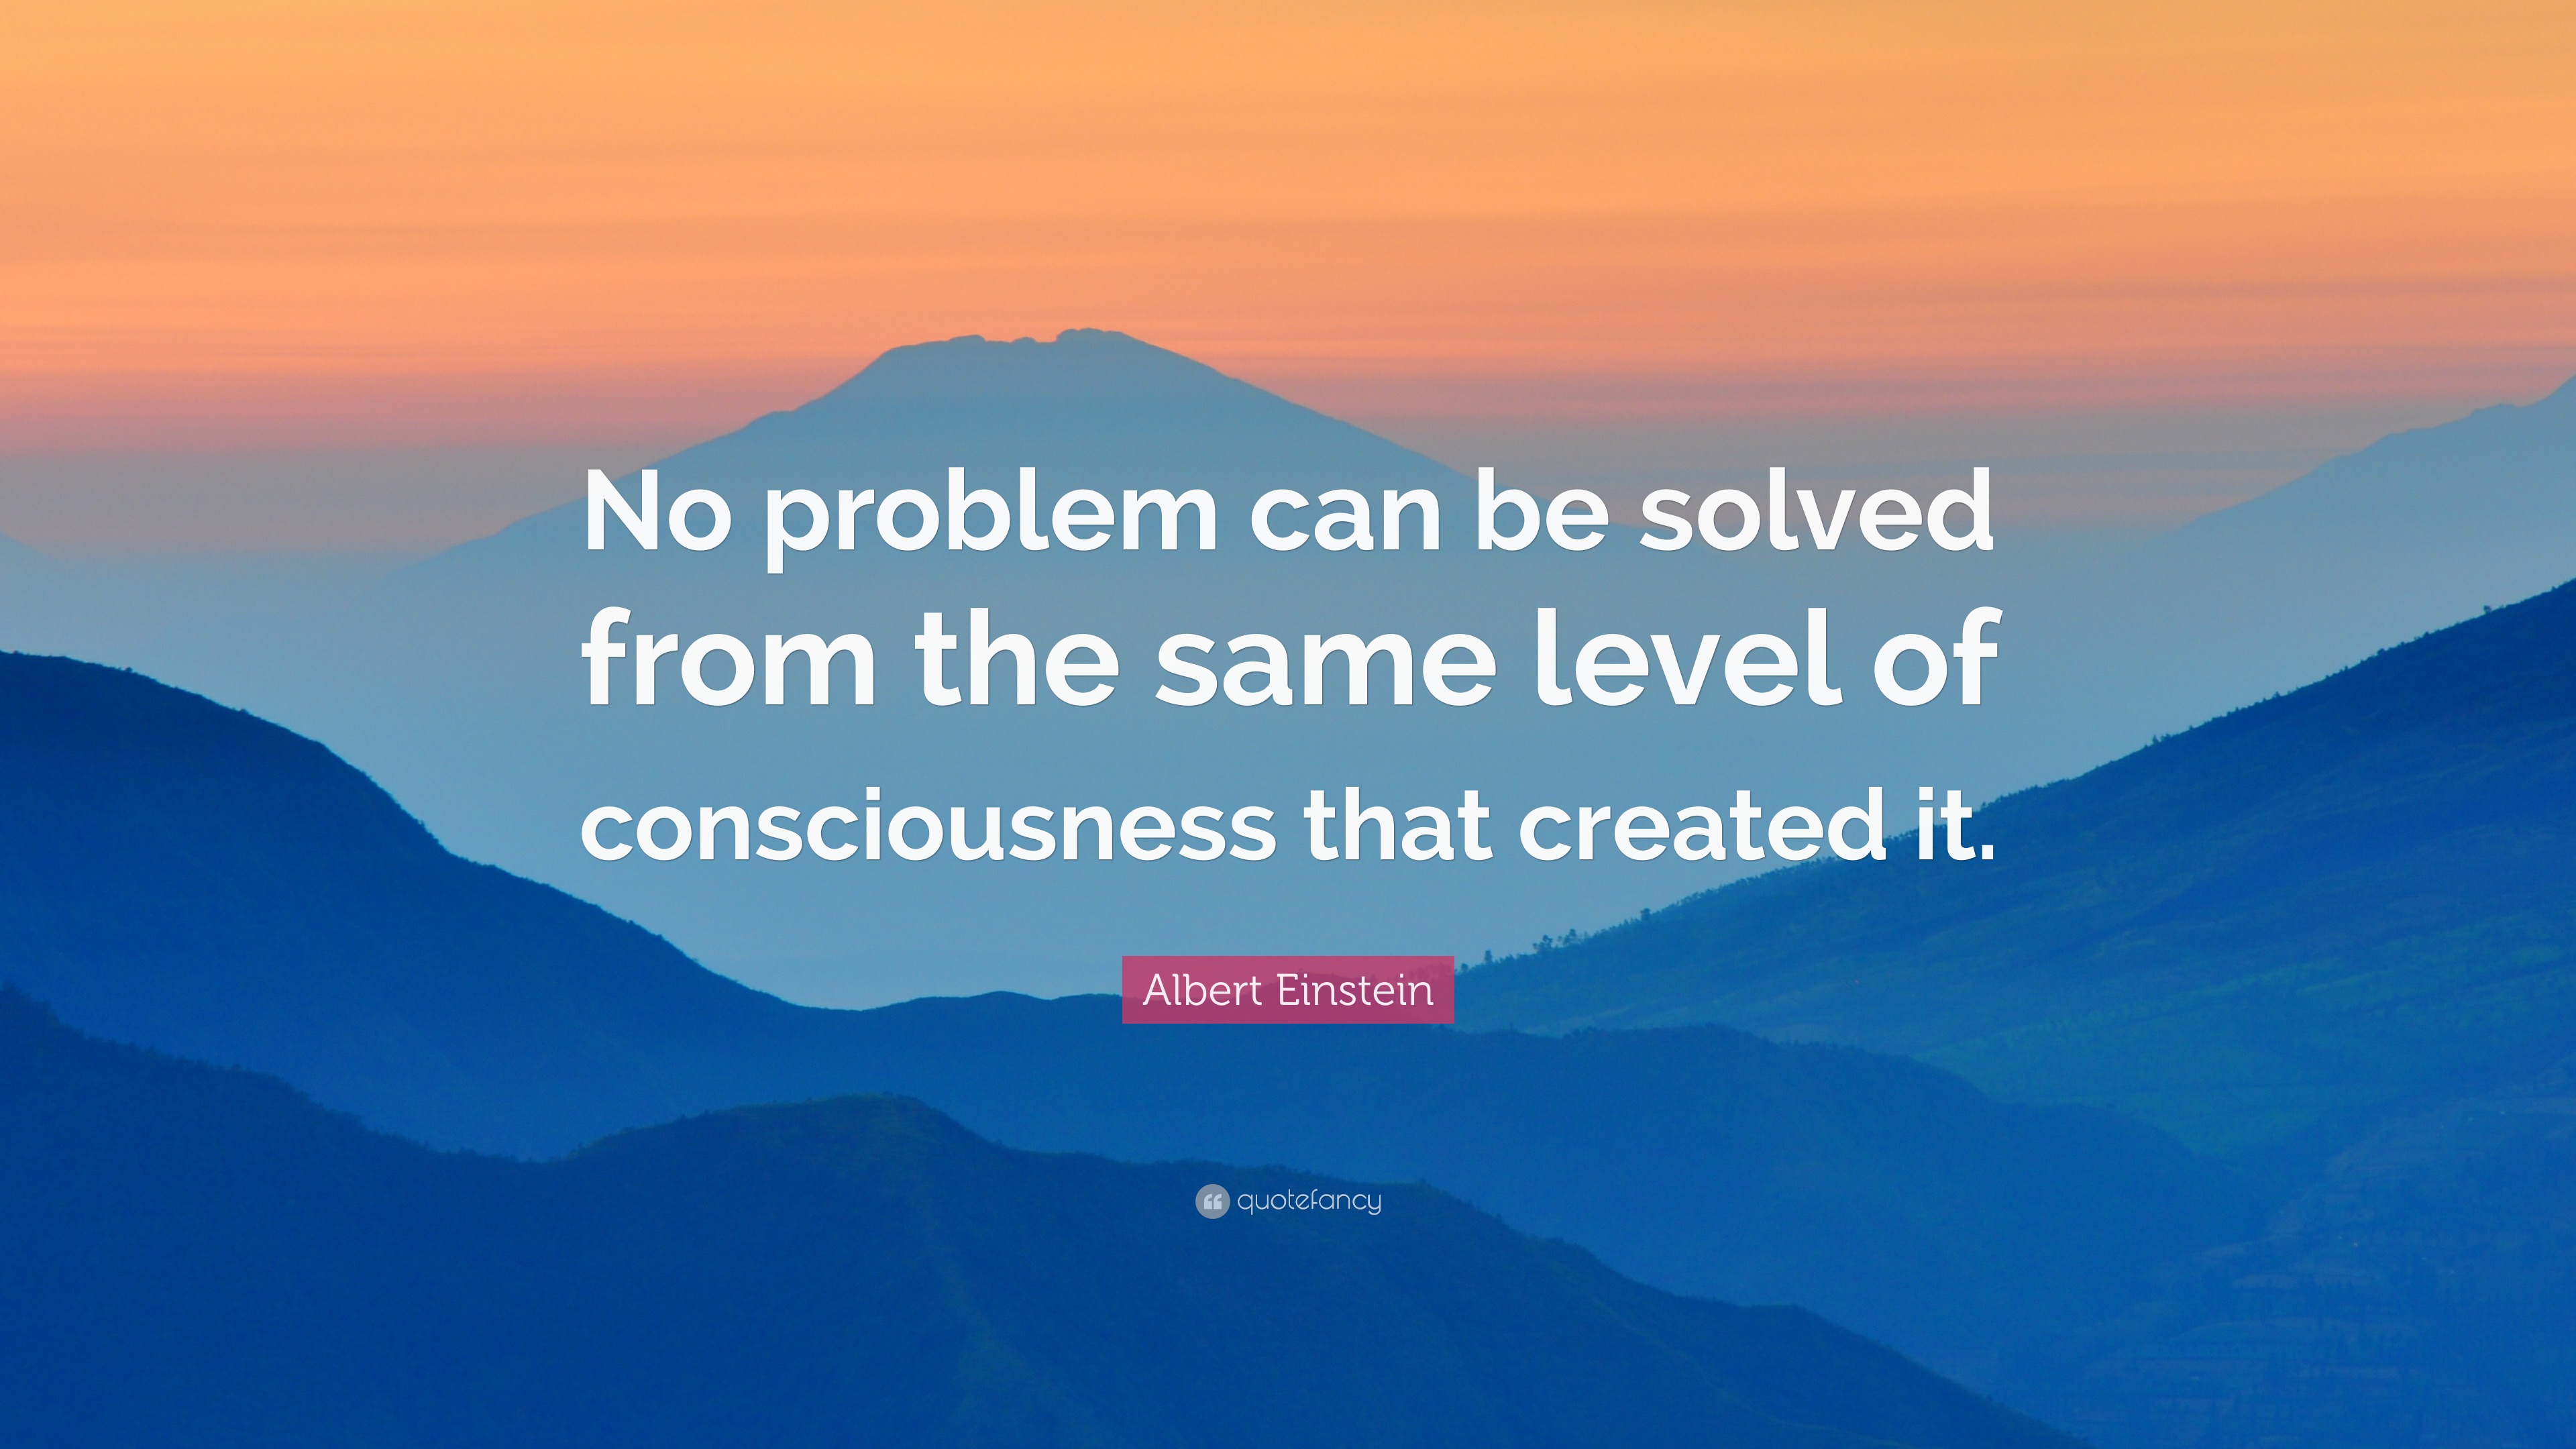 Albert Einstein Quote: “No problem can be solved from the same level of